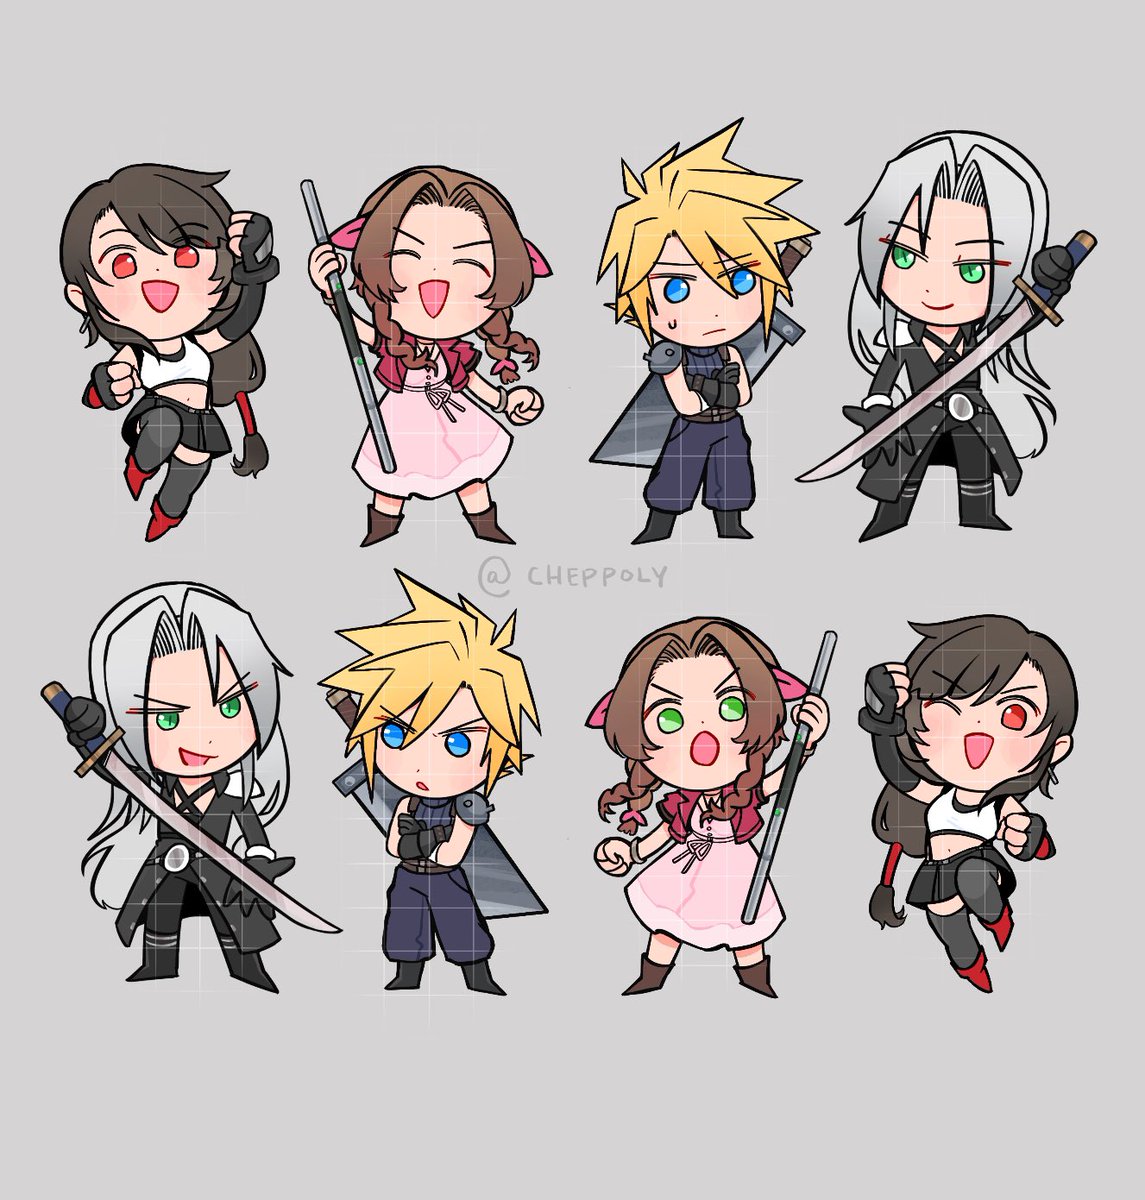 #ff7 ohhh….they are so small….And for what